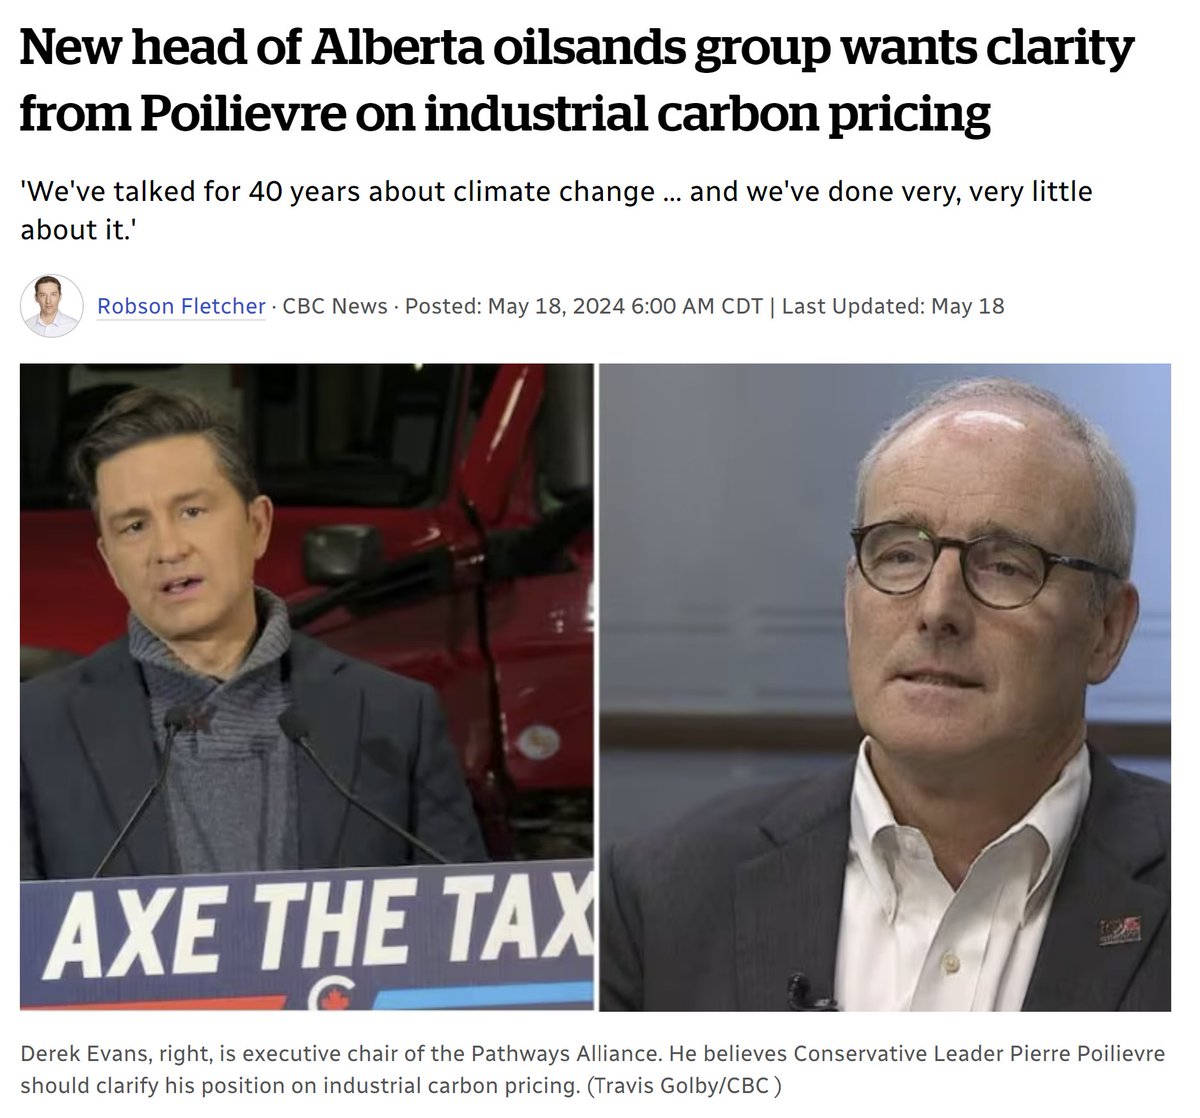 'carbon policy is going to be absolutely critical to maintain our standing on the world stage' We're at the stage where industry is also demanding our leaders be proactive. If not carbon pricing, then what? This is not the 1950's anymore. Action is required. #skpoli #Sask